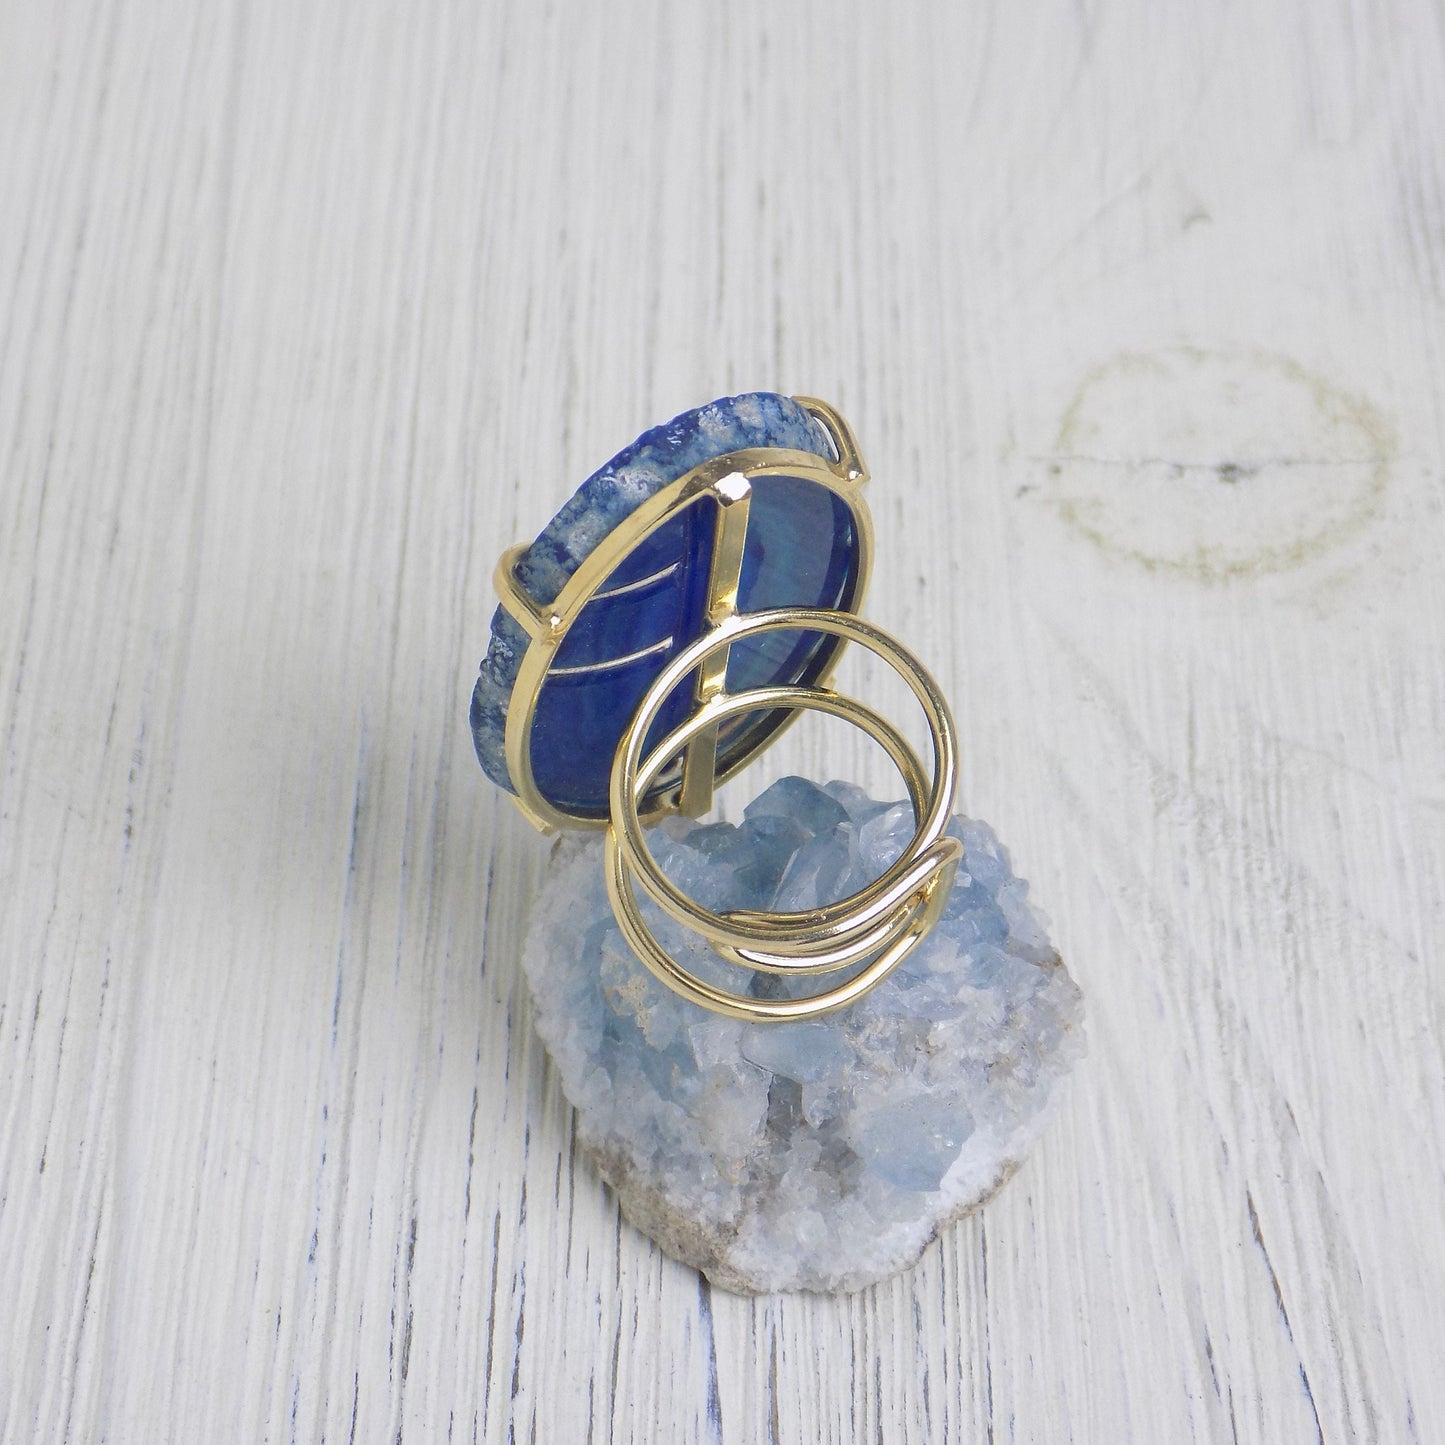 Raw Large Blue Agate Ring Gold Adjustable, Sliced Geode Cocktail Rings, Boho Crystal Statement Jewelry, G13-432